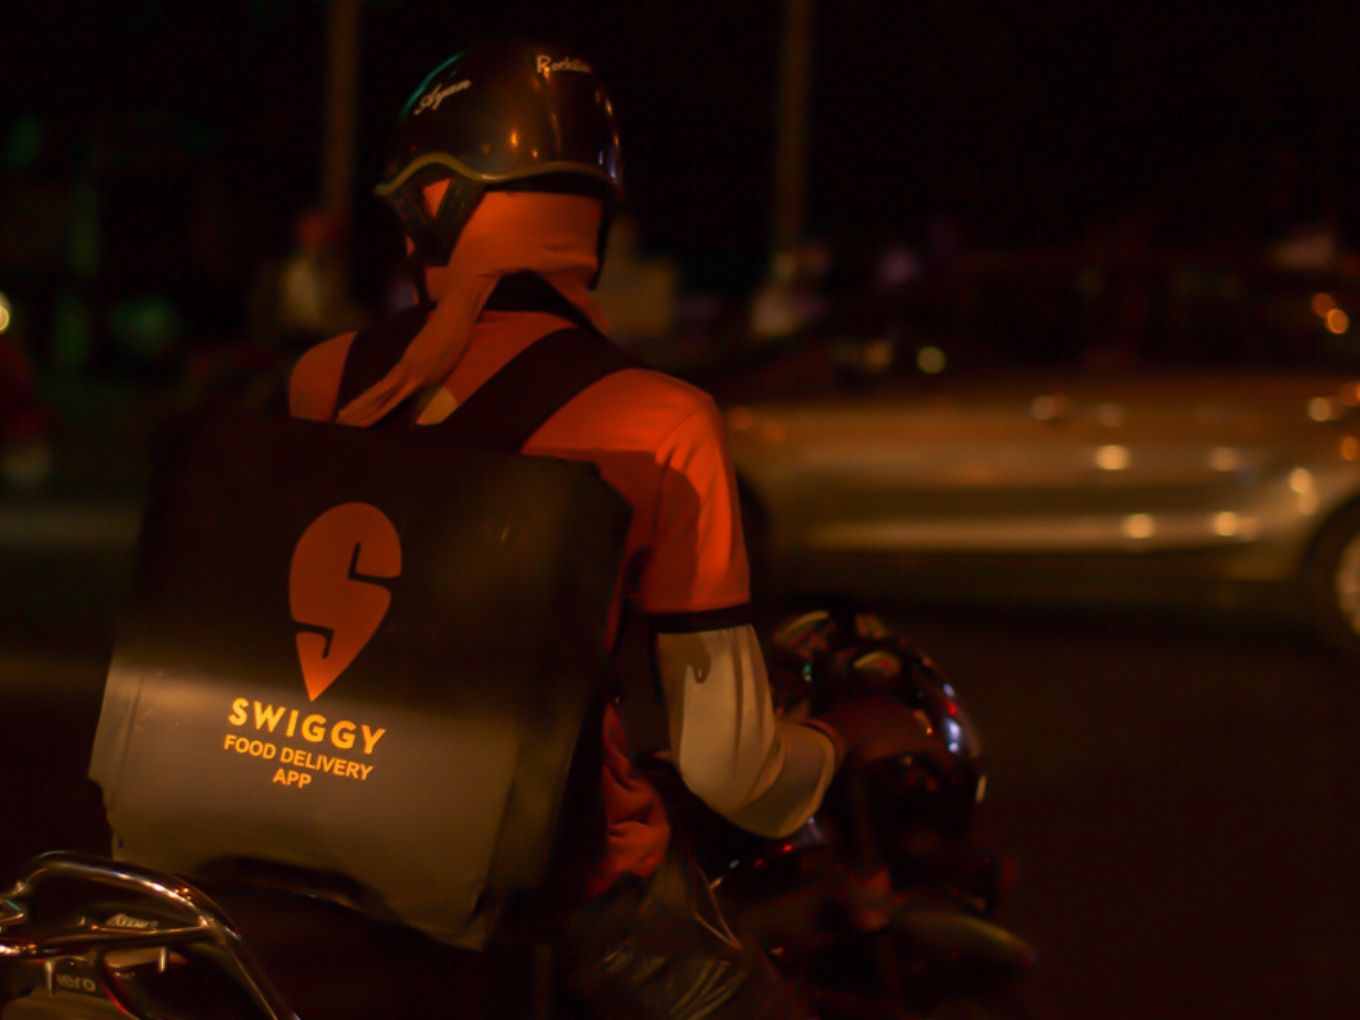 Swiggy Delivery Partner Threatens To Physically Assault Customer